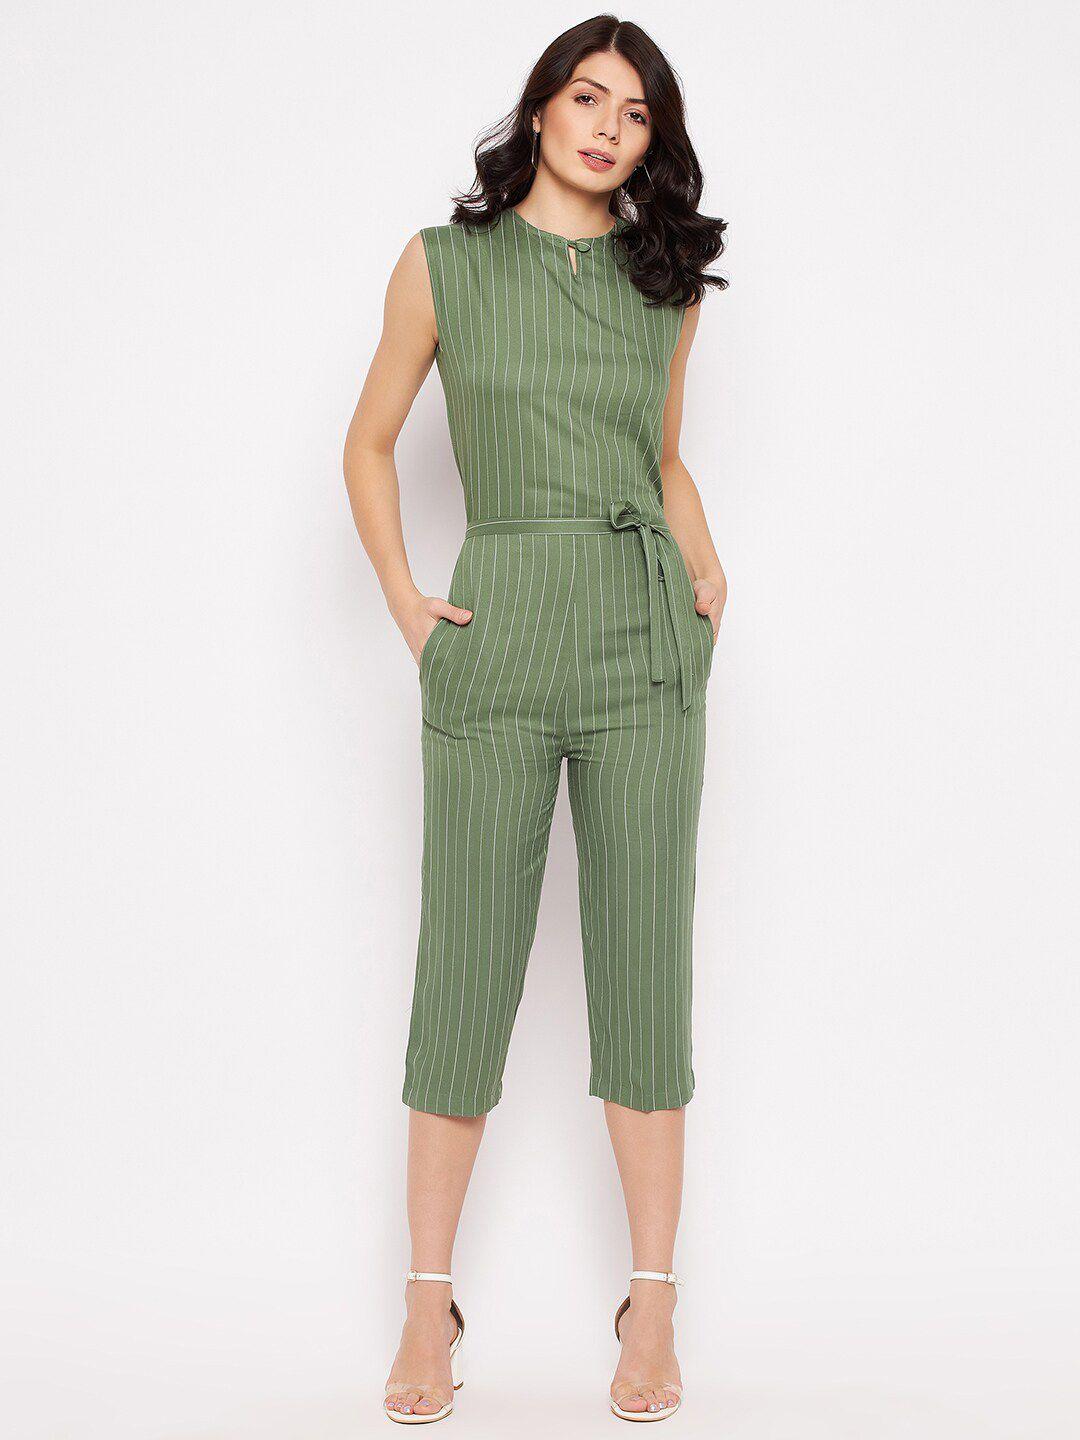 camey green striped culotte jumpsuit with lace inserts